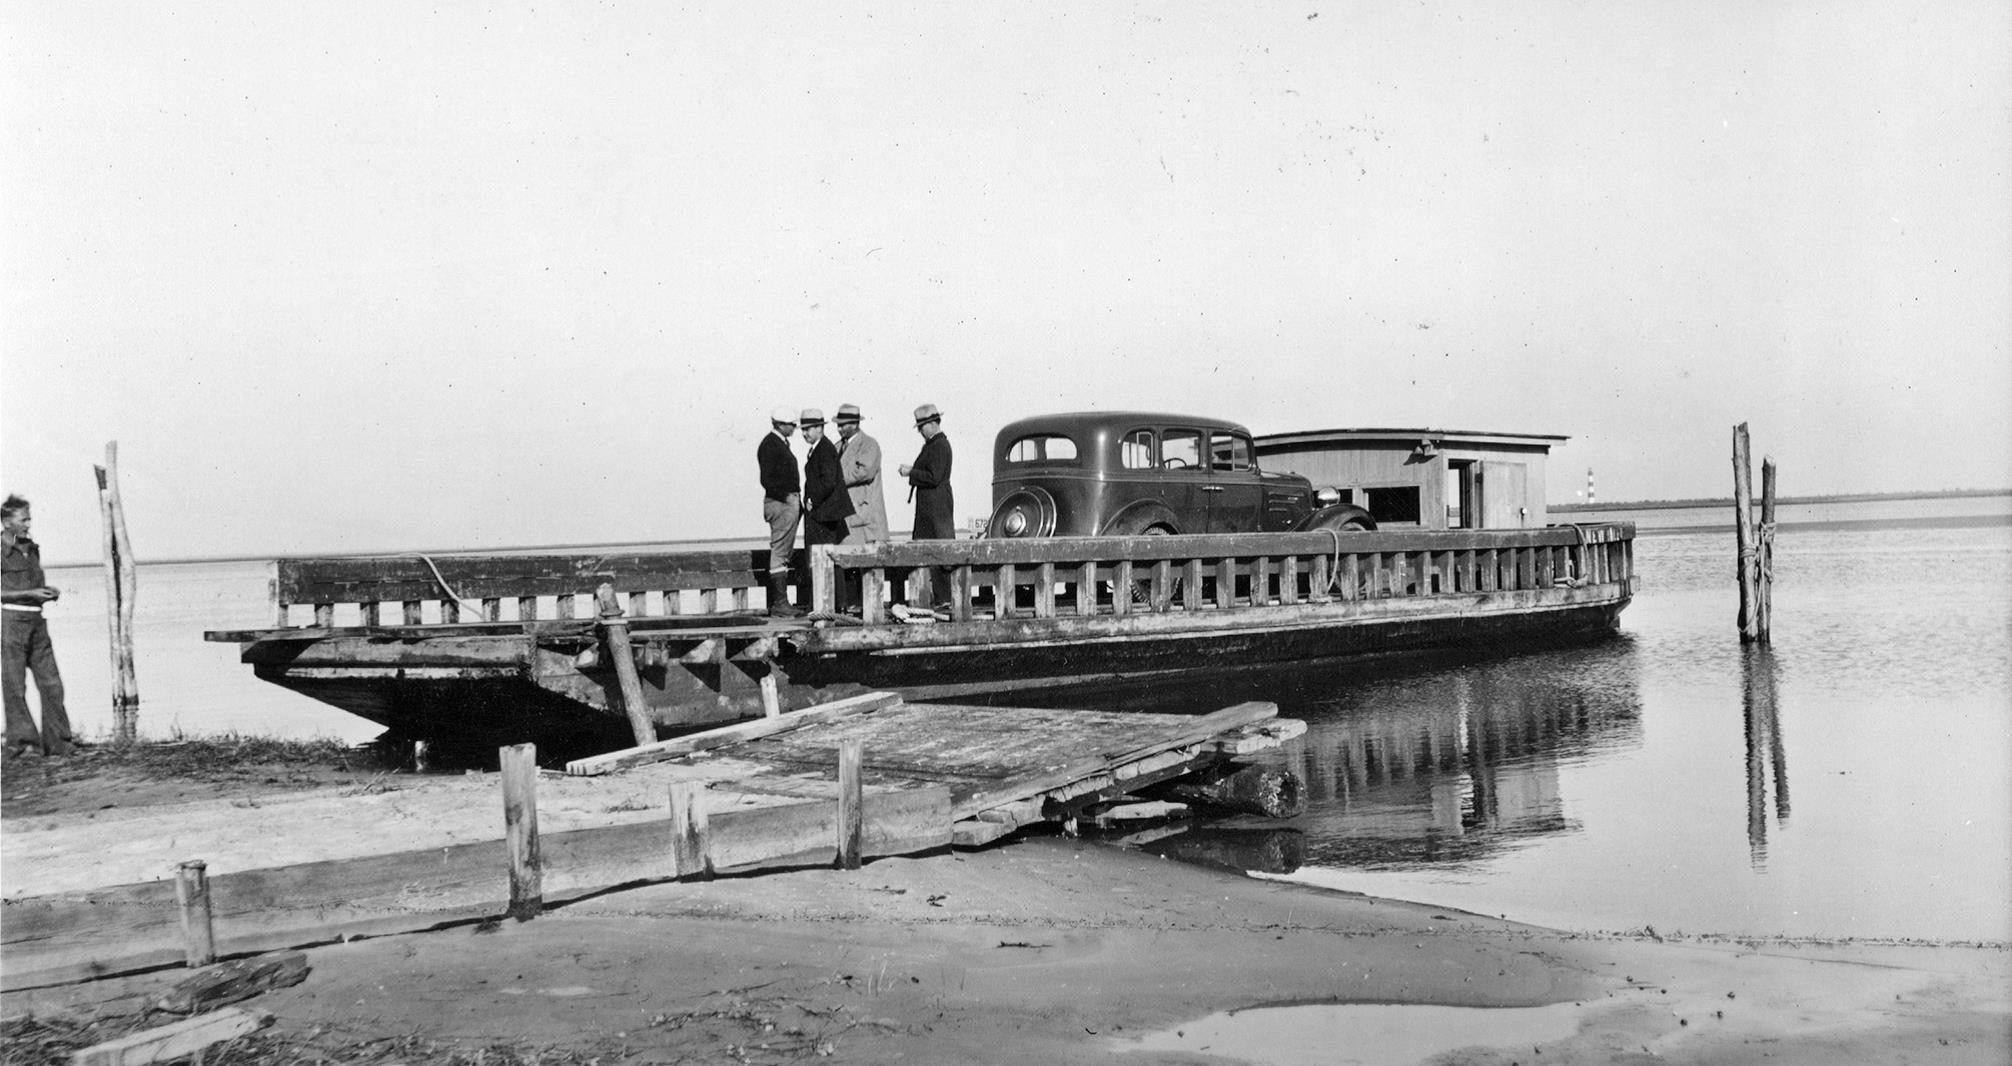 Yellowstone Superintendent Roger W. Toll and three other individuals on a vehicle ferry, 1934.